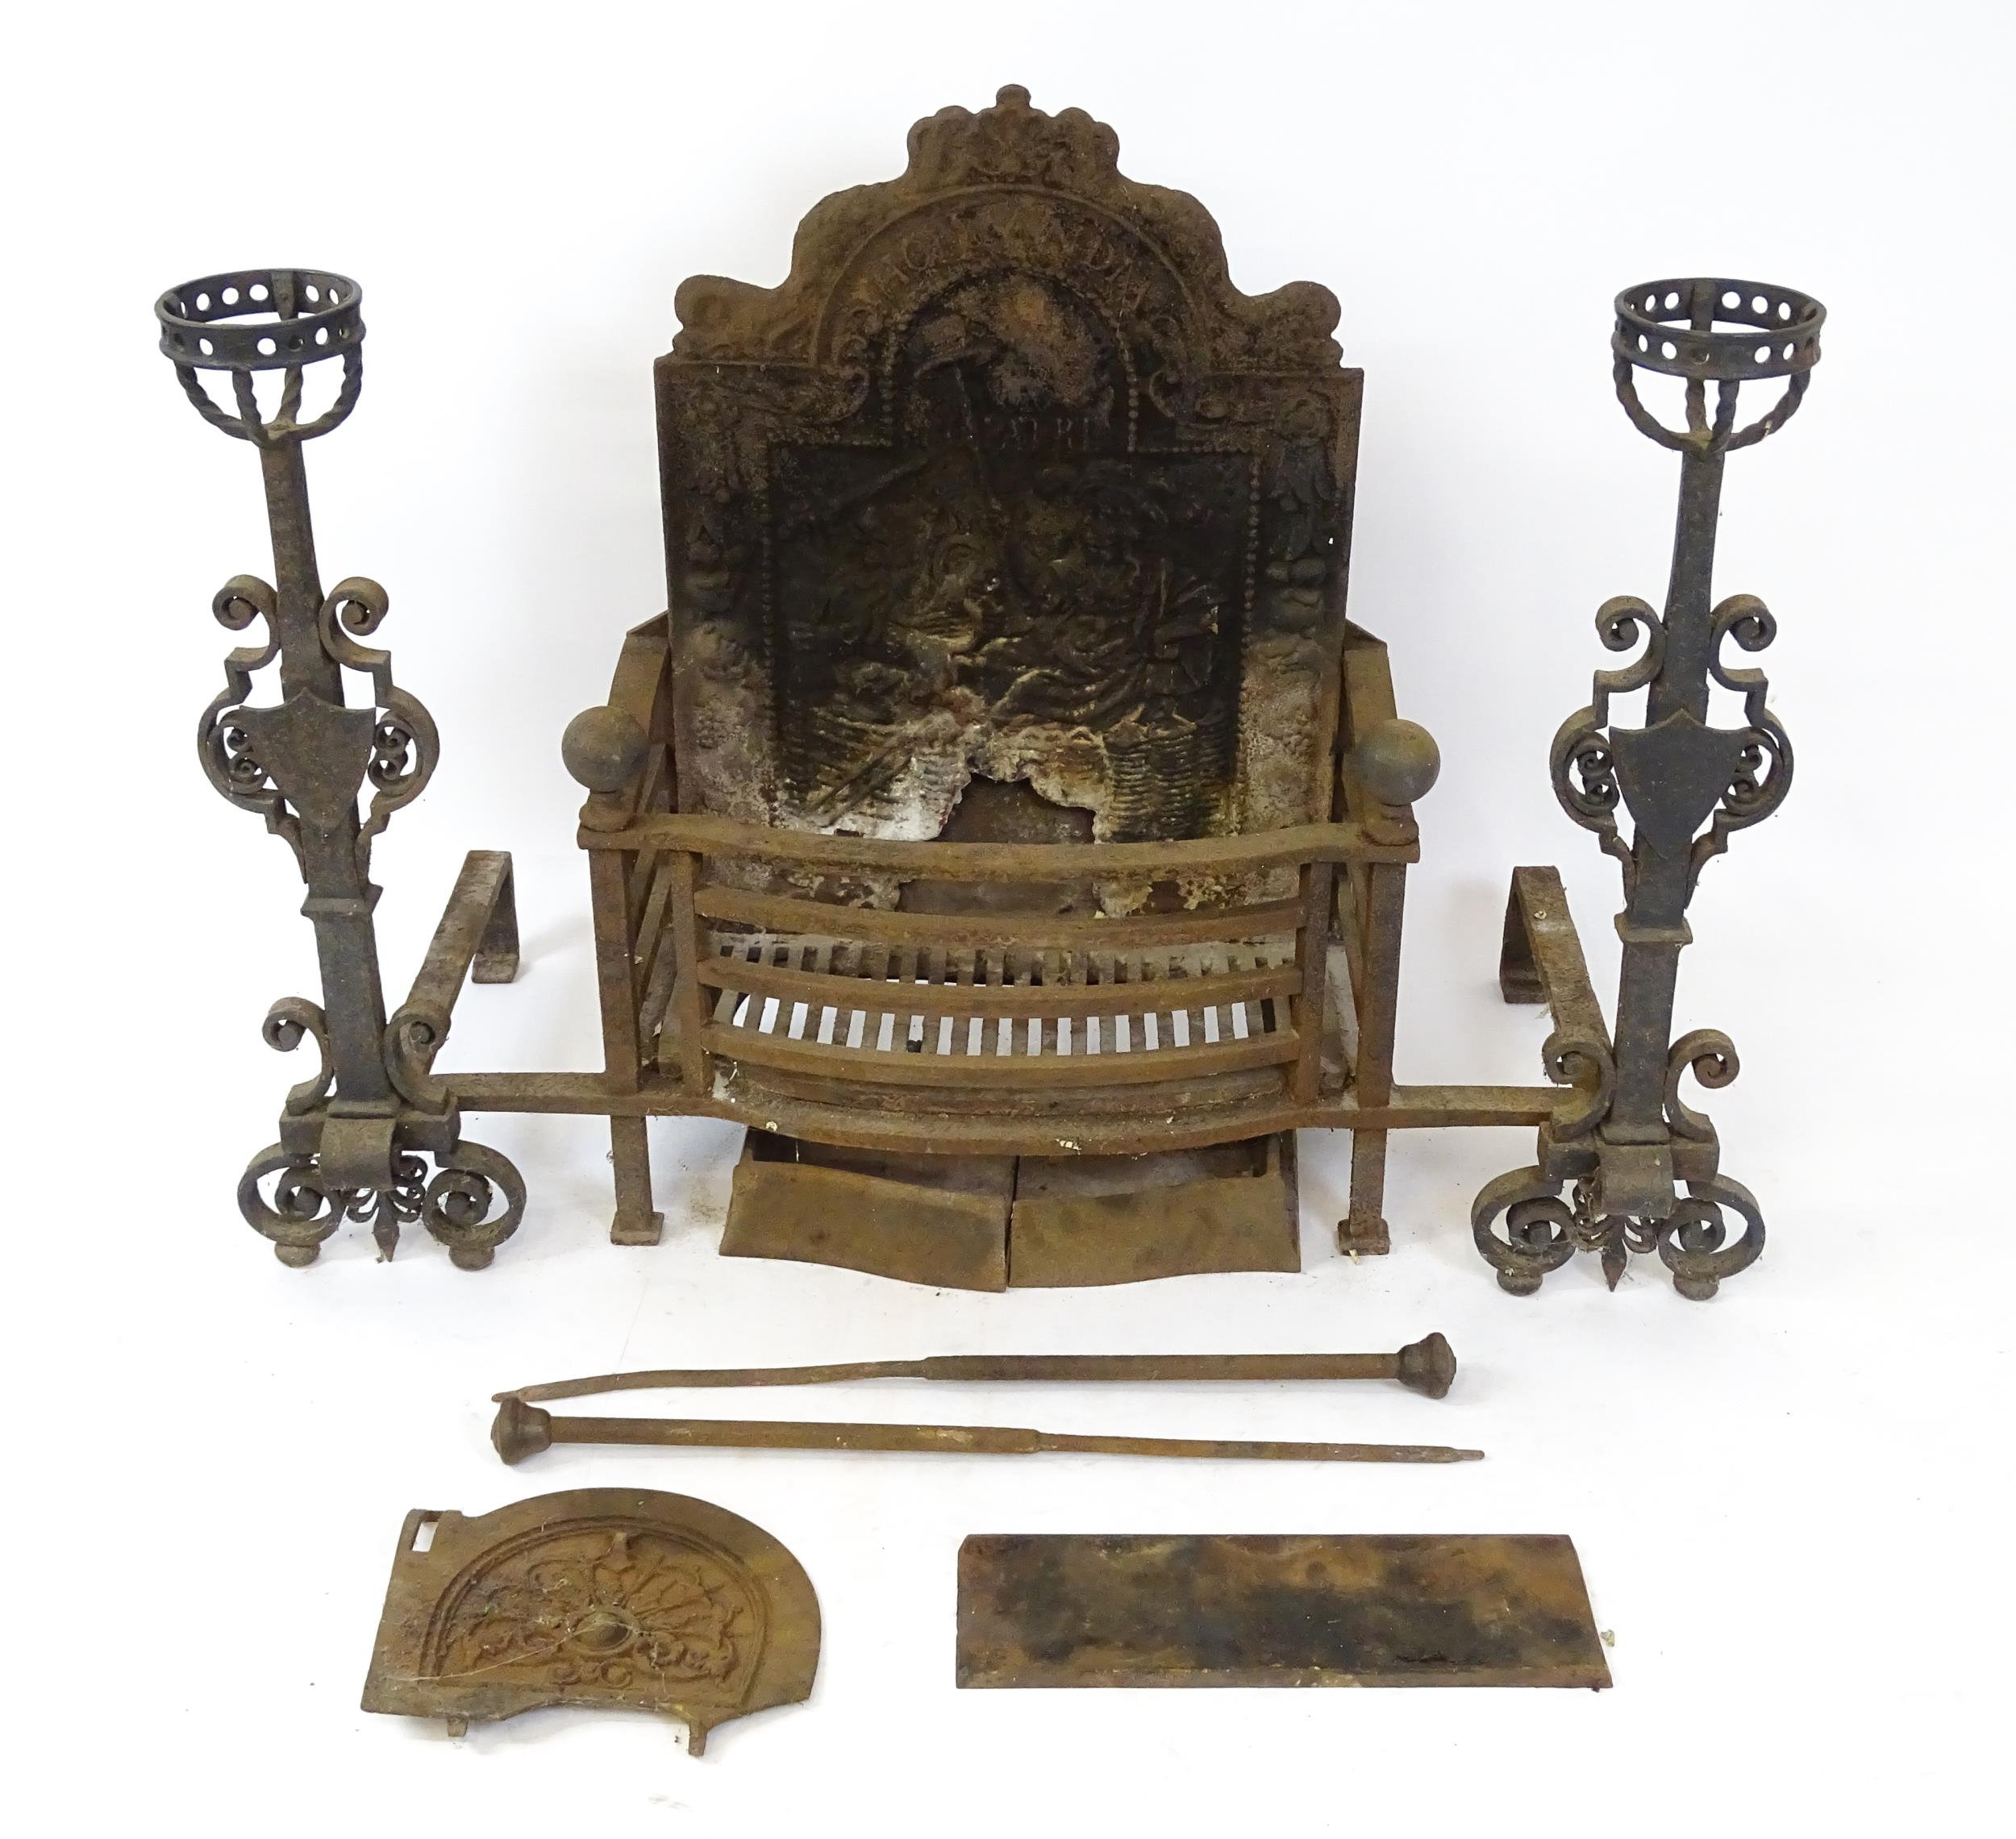 A large cast iron fire basket, the back decorated with figure and lion, marked 'Hollandia Pro